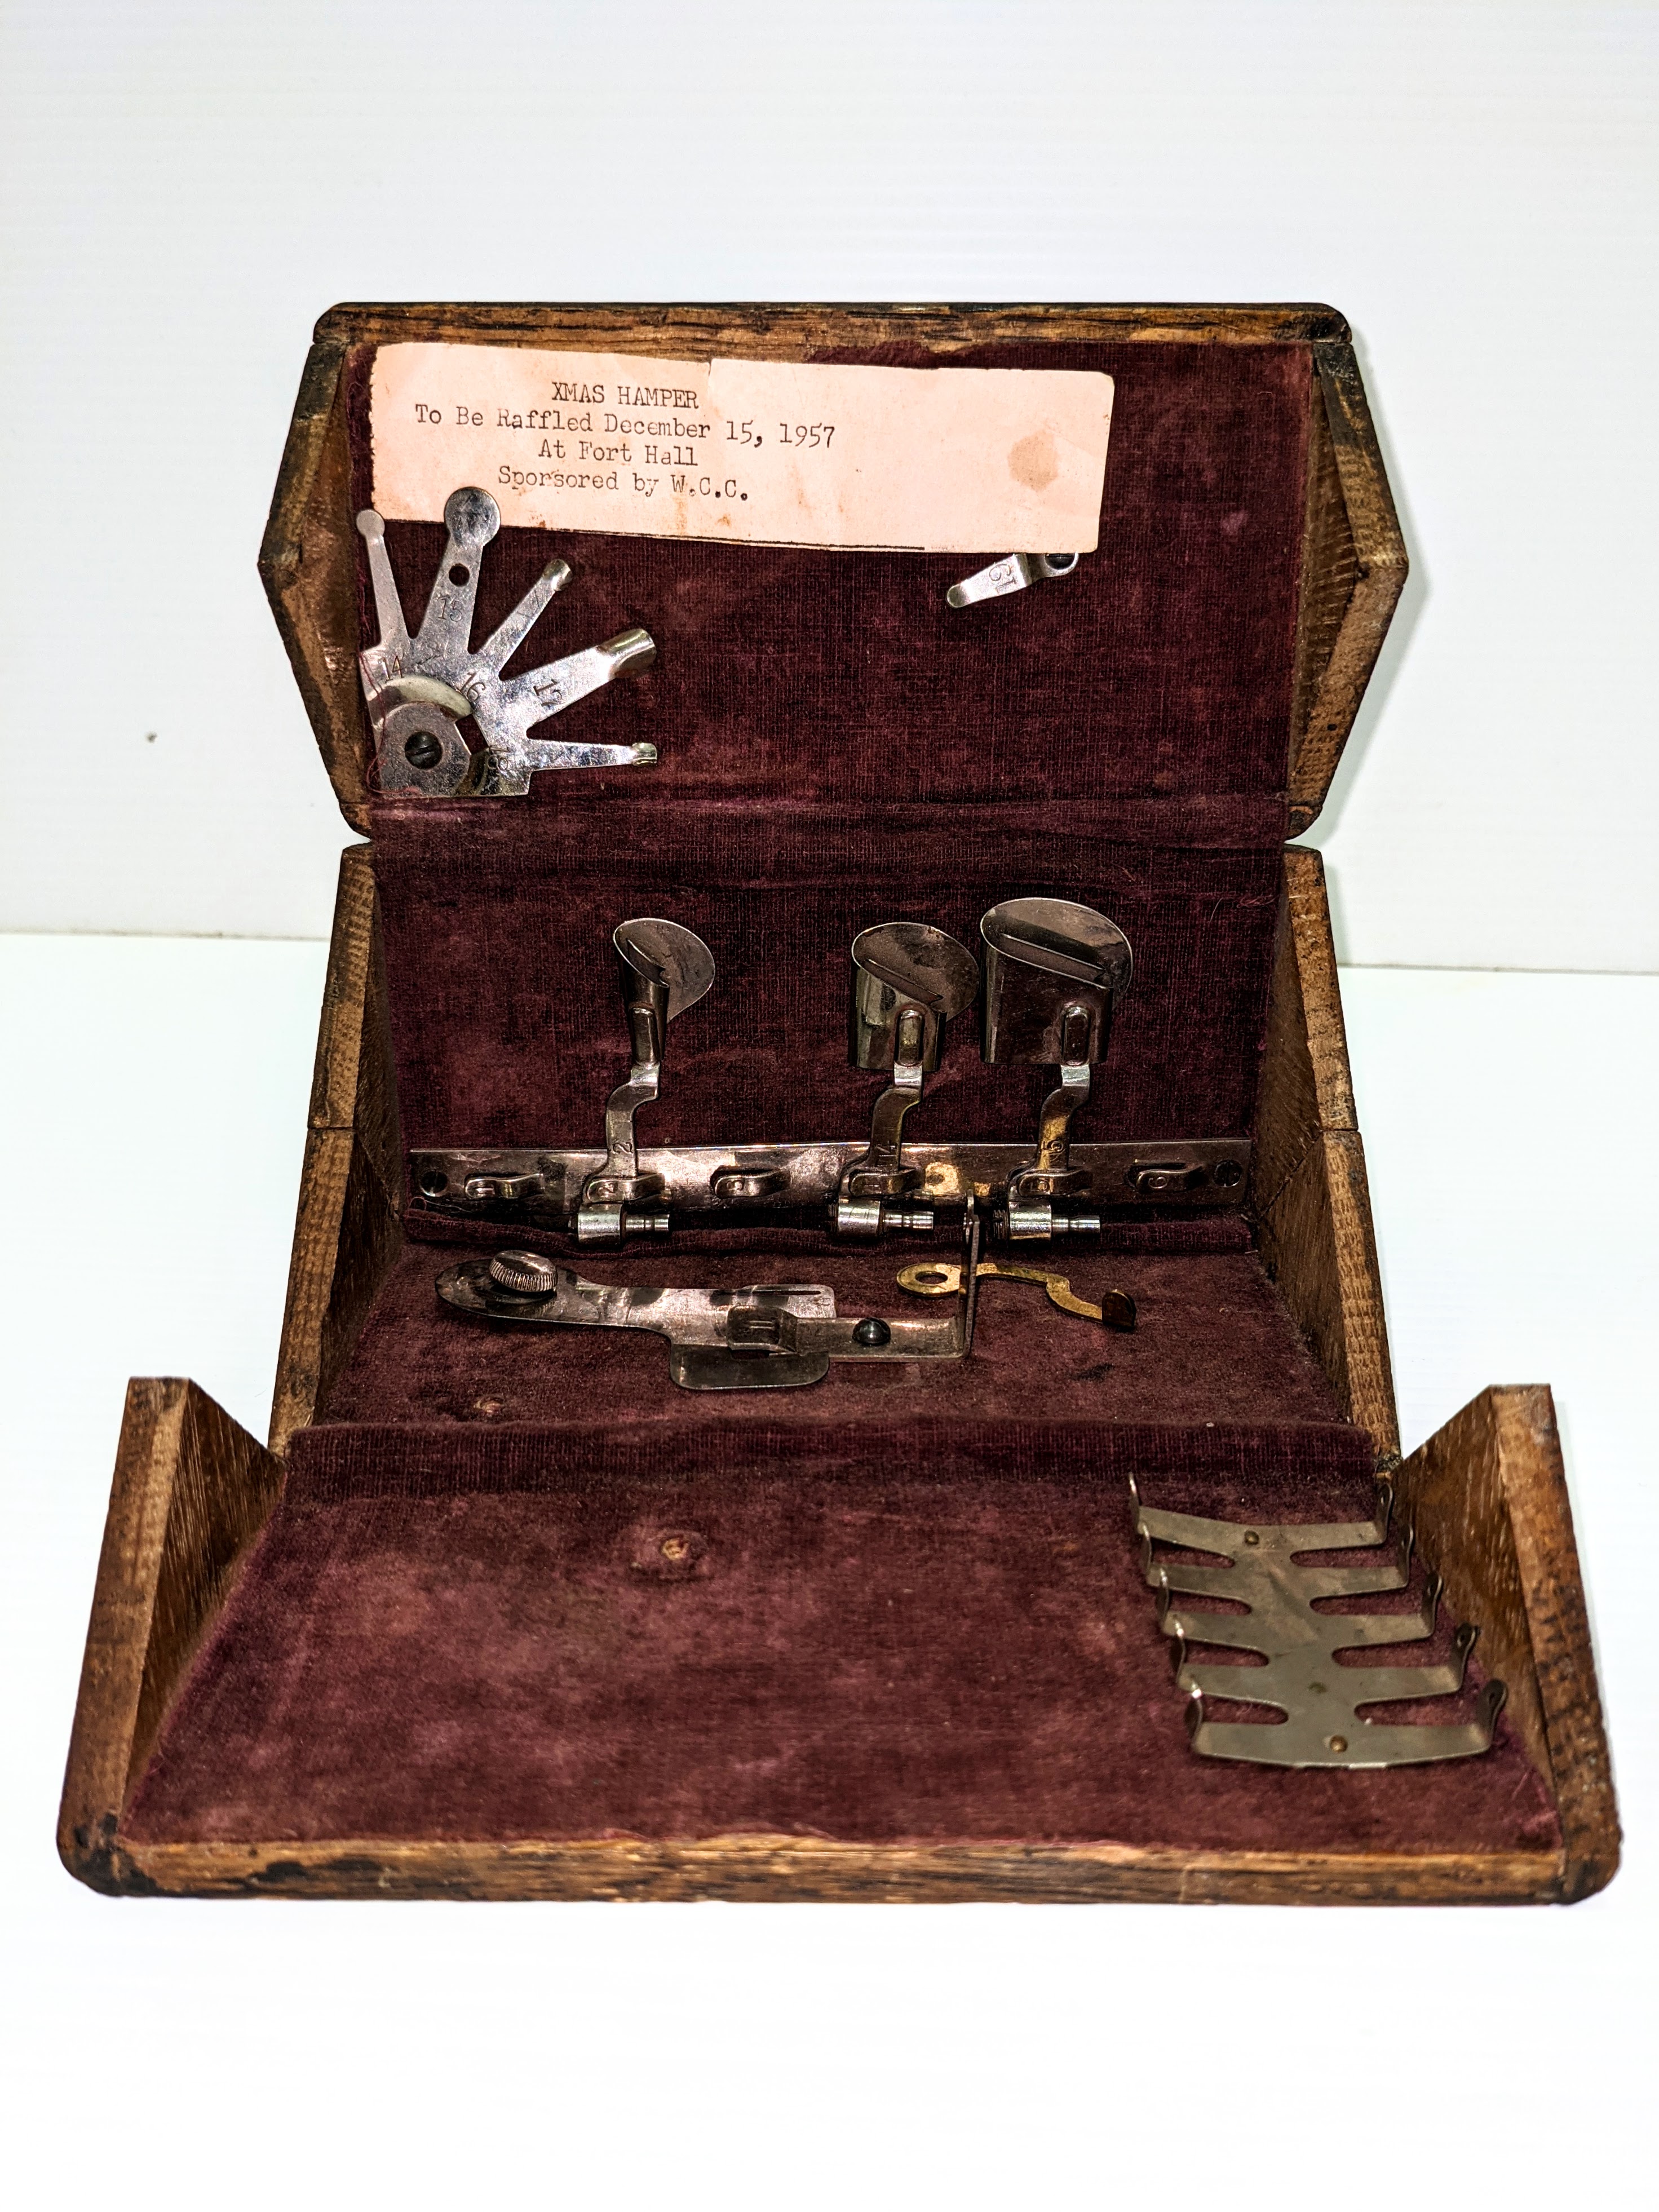 Known as a "Puzzle Box" by modern collectors, this foldable, velvet lined, wooden box is a storage device for various adapters and parts of a Singer sewing machine. First invented in 1889, each box had specific parts for one of 14 models of Singer sewing machine. This box is not complete with it's arrangement of parts and one of the pieces appears to be homemade. Perhaps more interesting is the caption included in the box noting that the unit was donated by the W.C.C (Womens Community Club) to be raffled for a "Xmas Hamper" at the Fort Hall on December 15, 1957.

07/06/2021
2004.11.23.03 / MacRoberts, Estella + Lewis